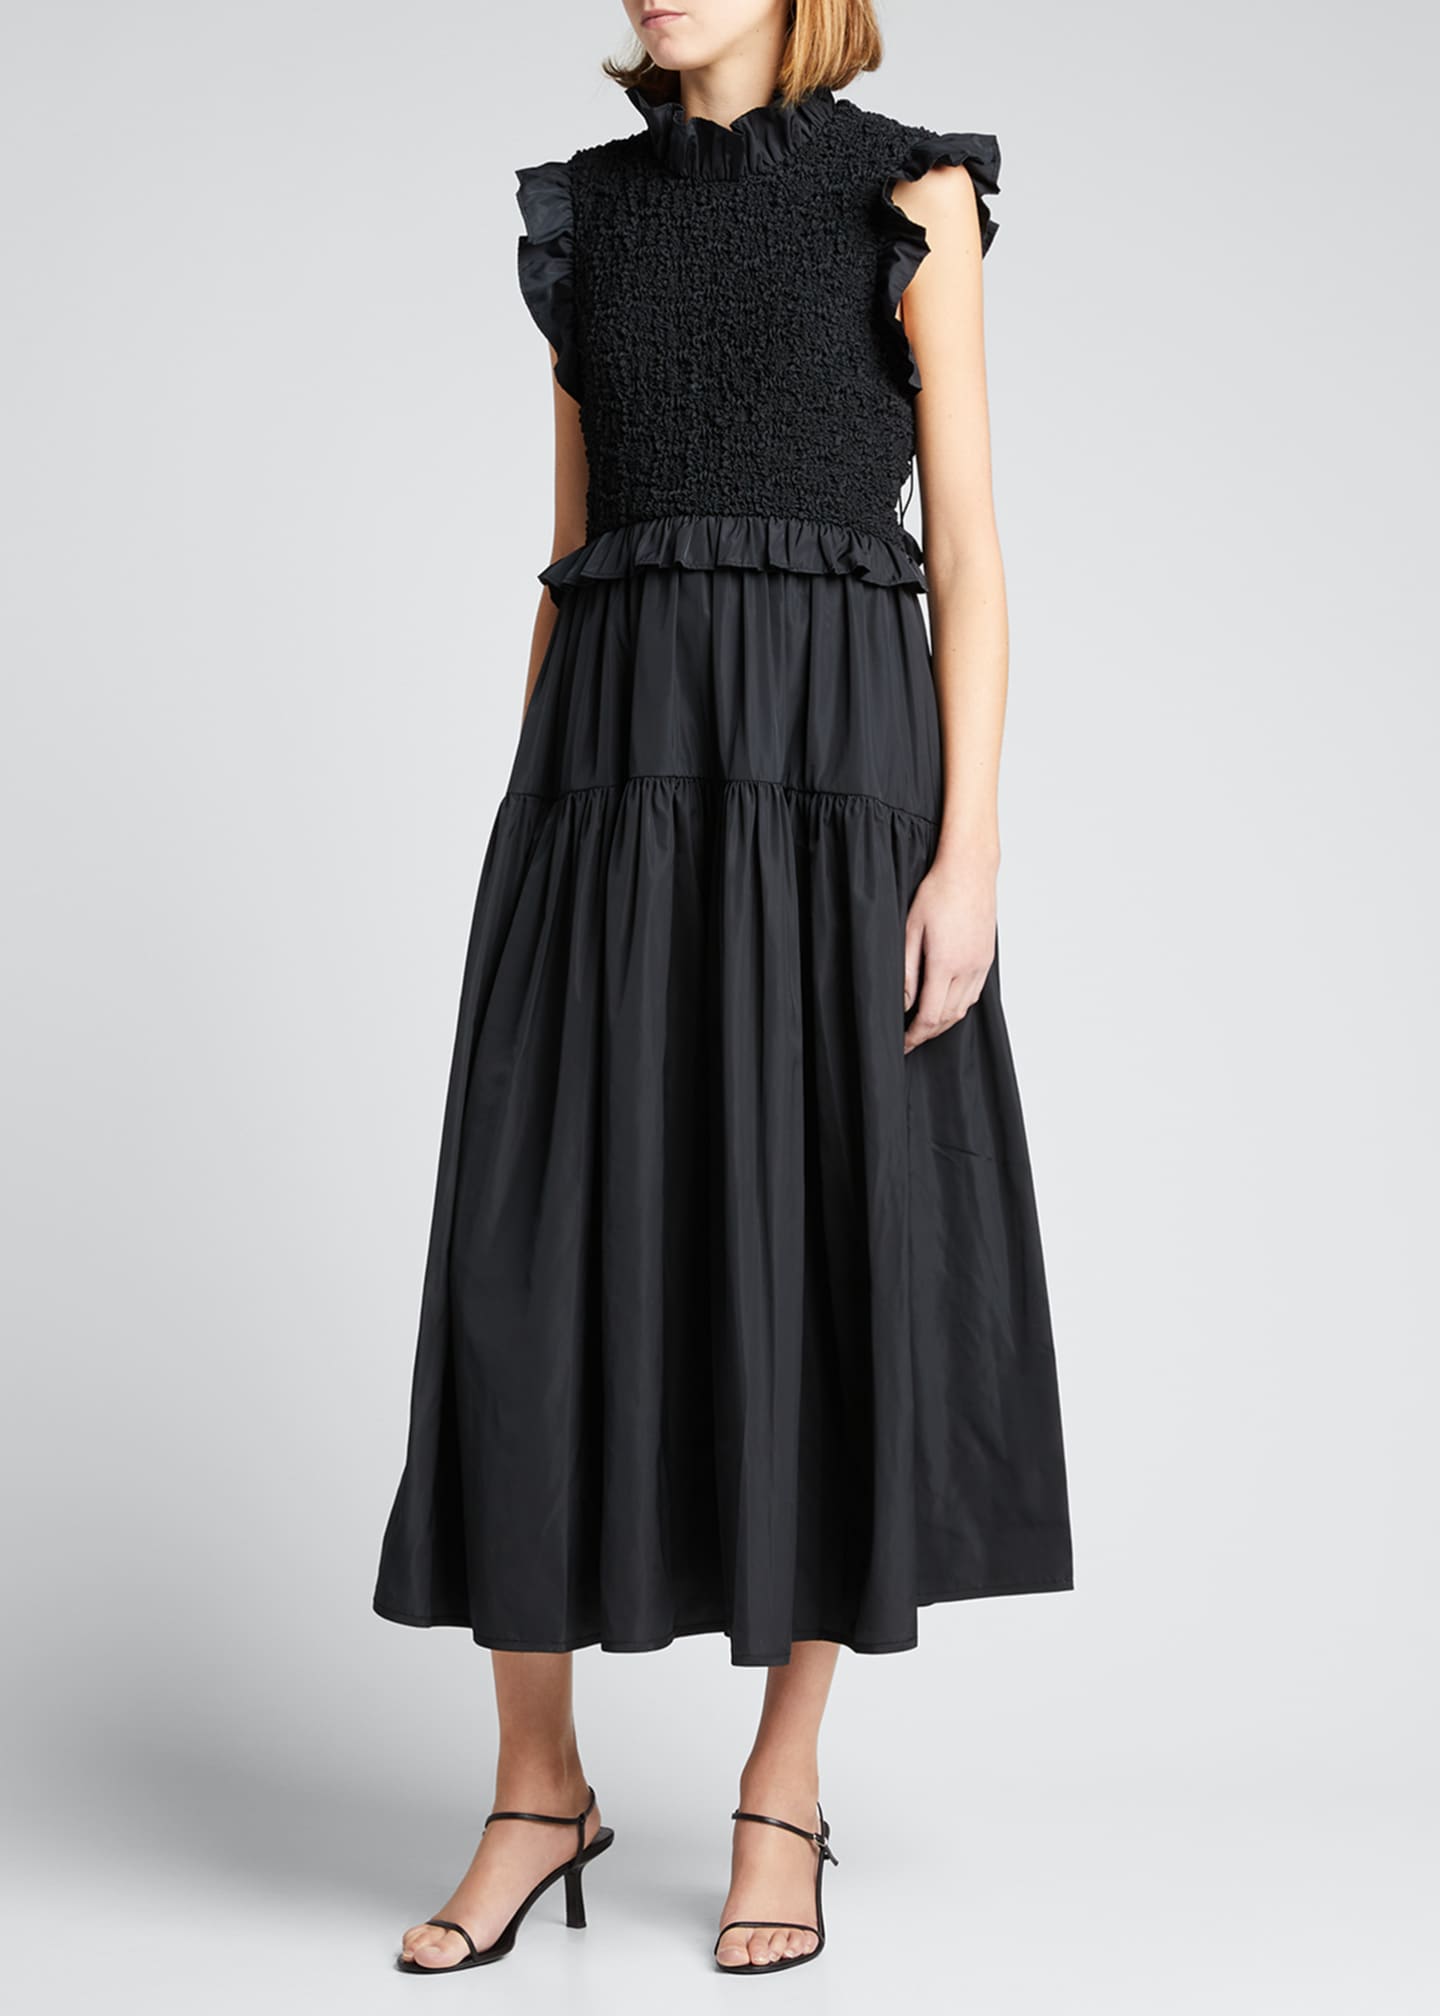 Cecilie Bahnsen Ruffle Smocked Open-Back Midi Gown - Bergdorf Goodman